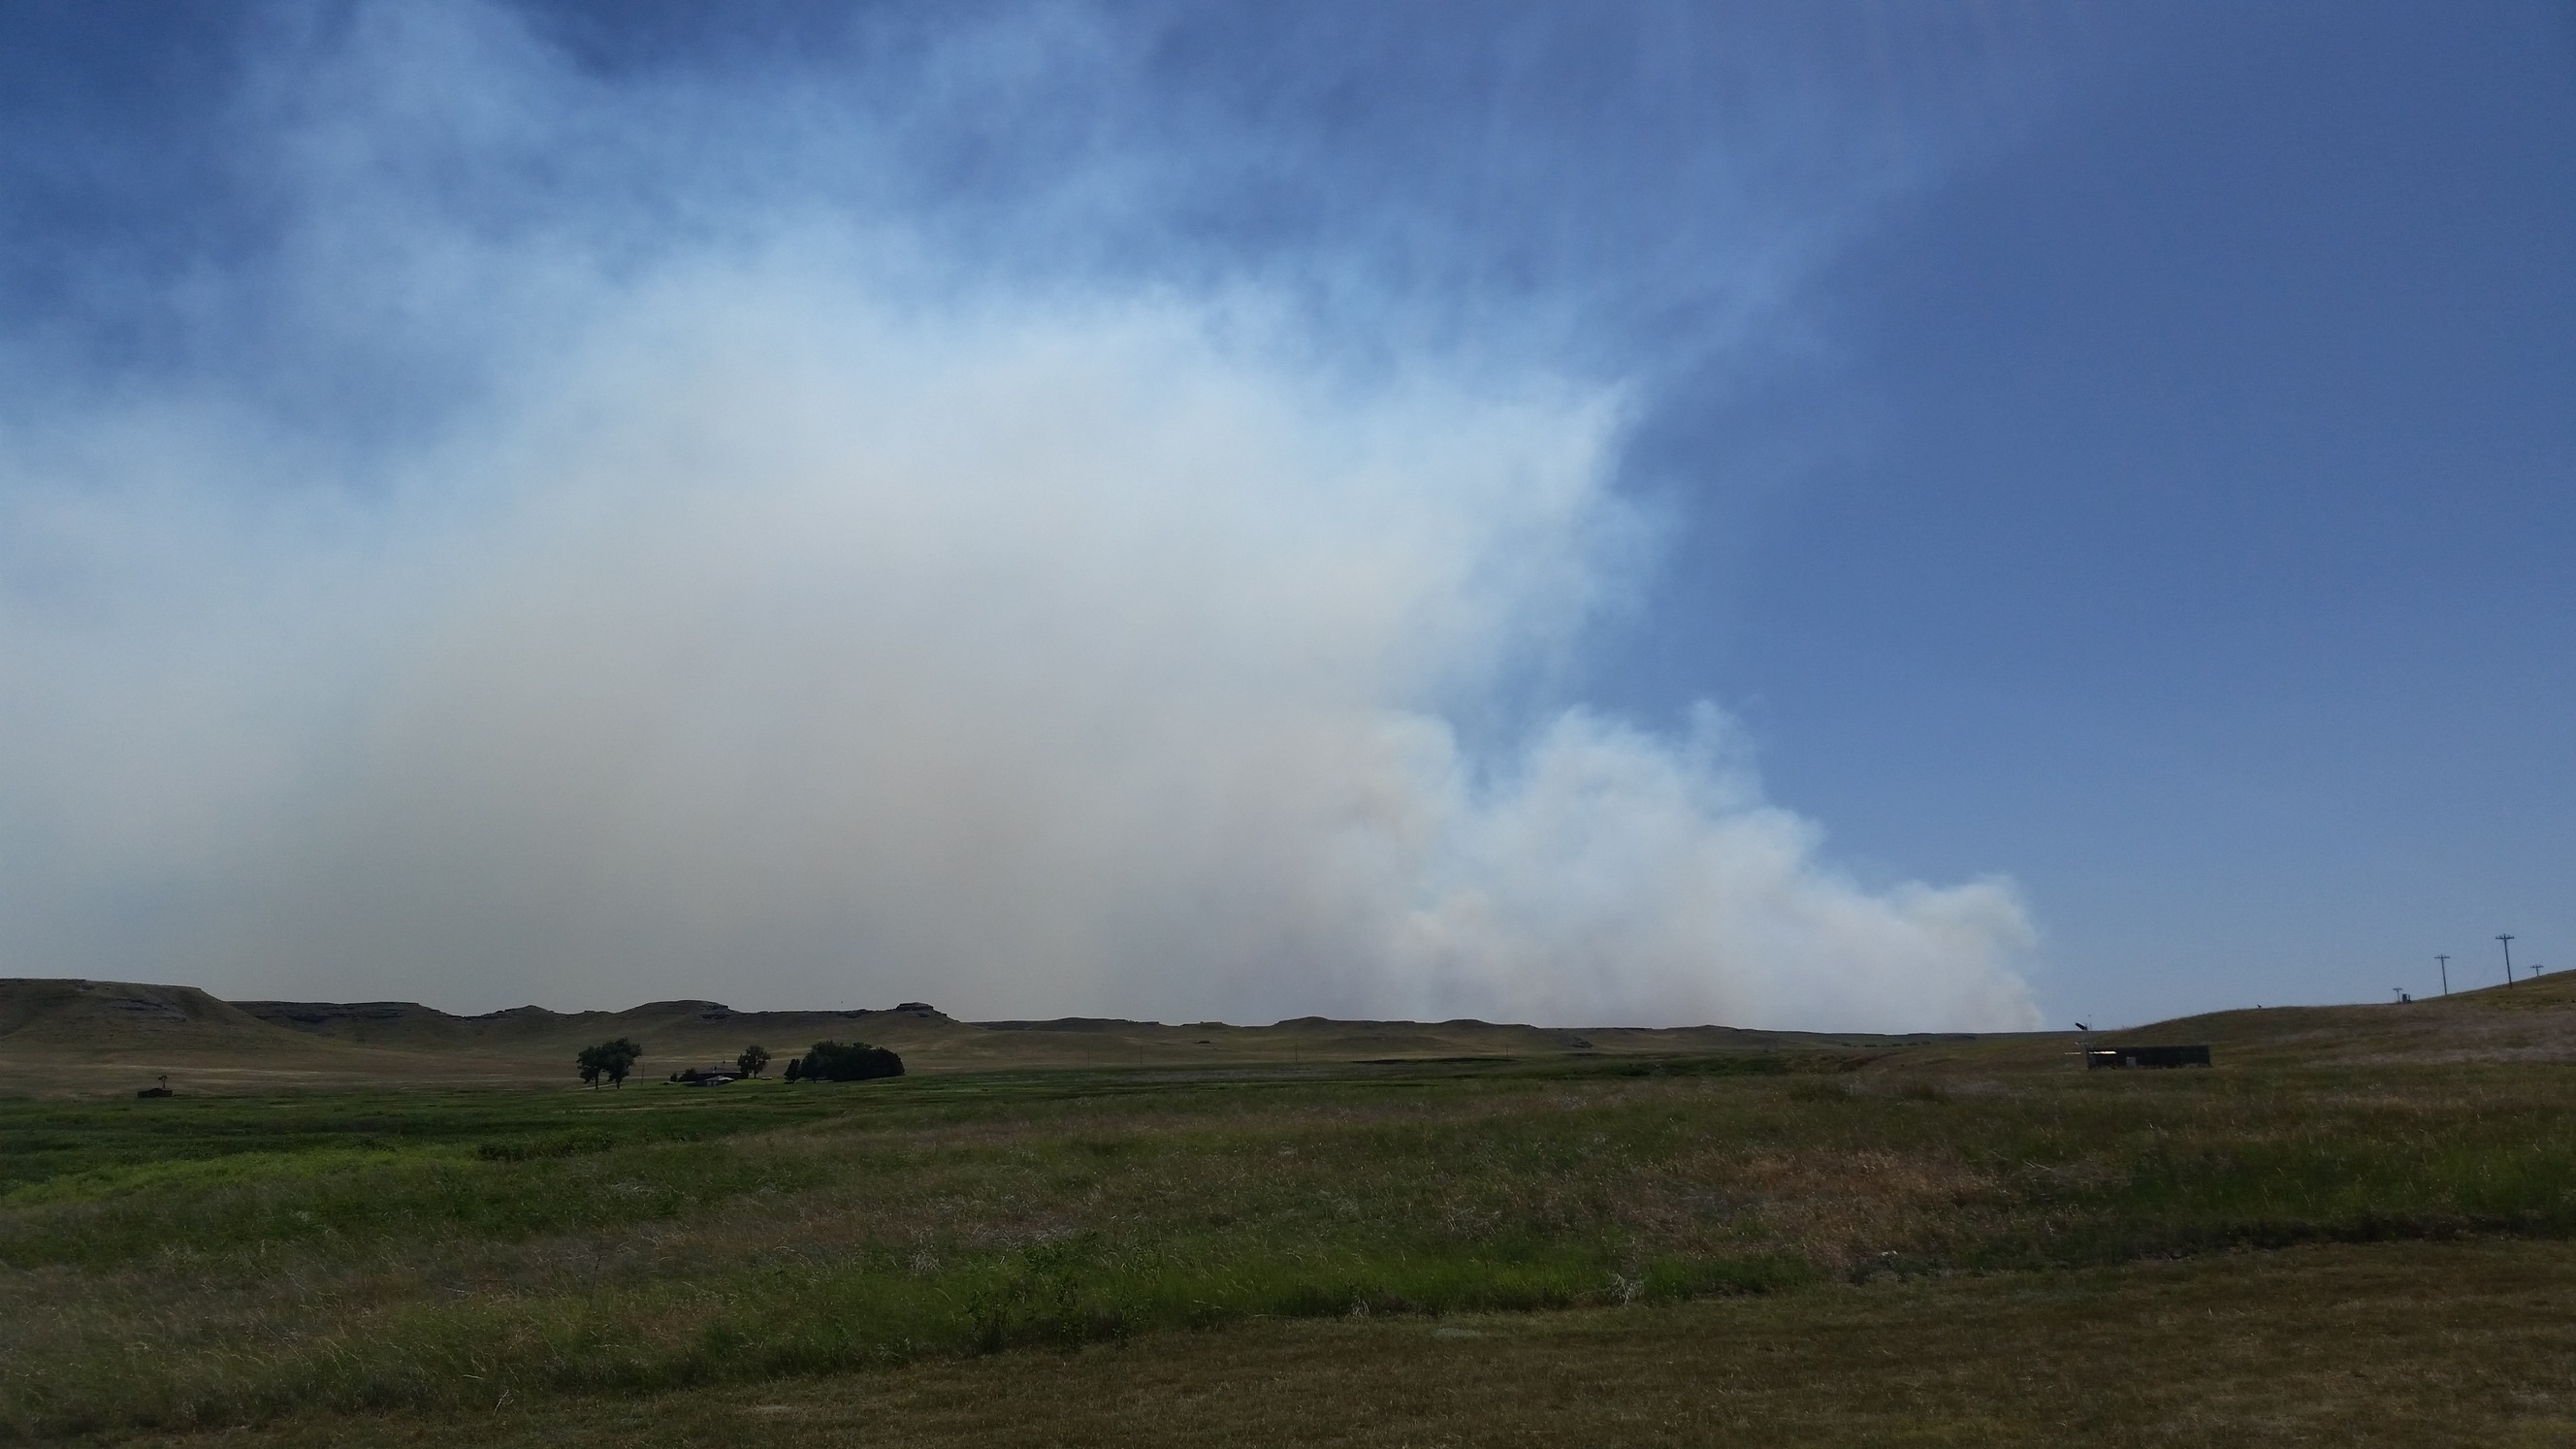 Cloud of white and dark gray smoke over a grassy plain